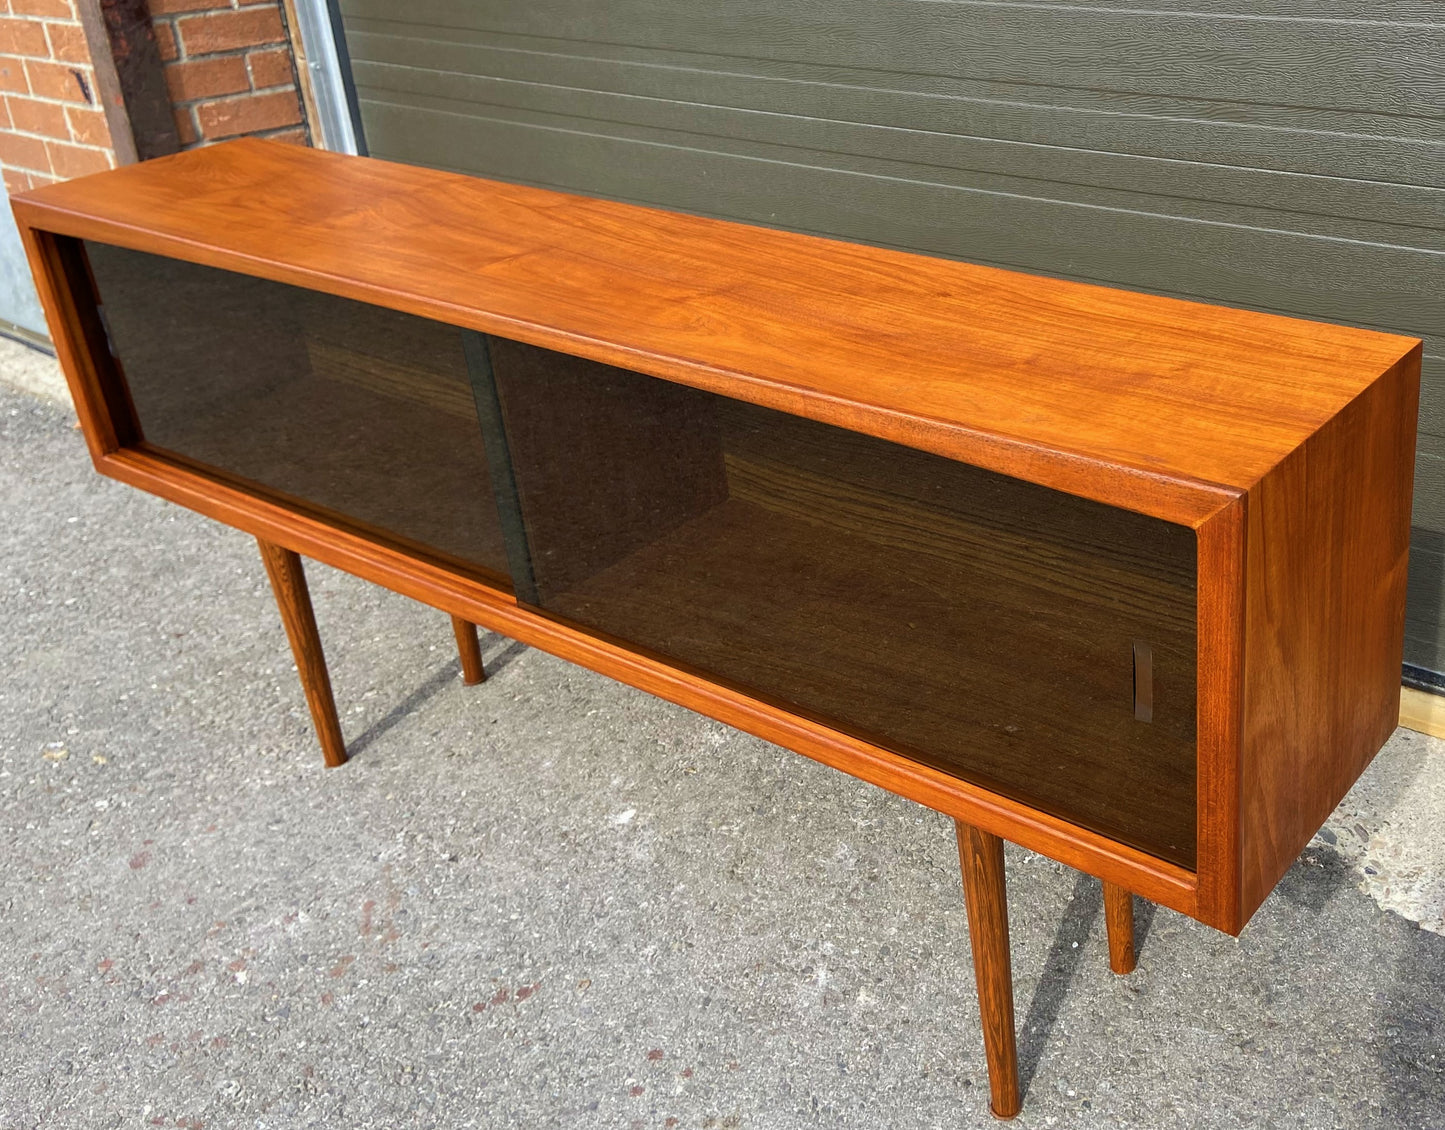 REFINISHED Mid Century Modern Teak Bookcase Display 5 ft Perfect